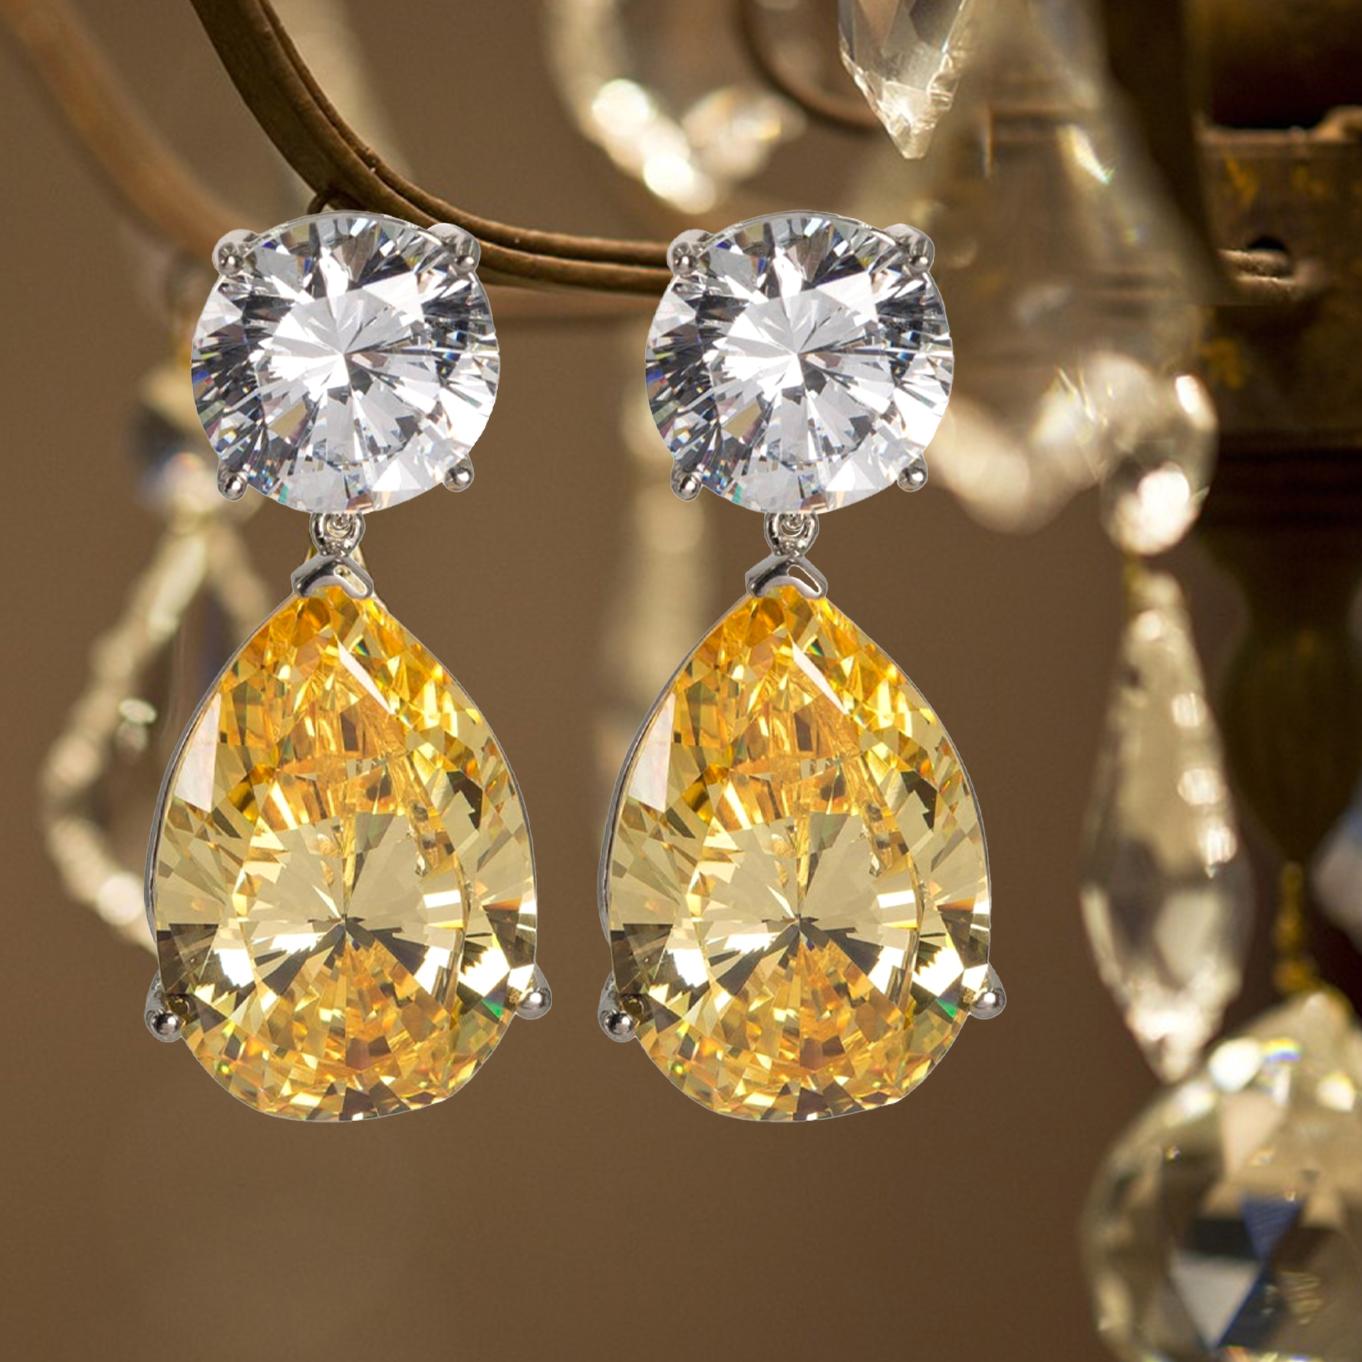 Modern  Large  Created Diamond Look White and Yellow Drop CZ Earrings by Clive Kandel For Sale